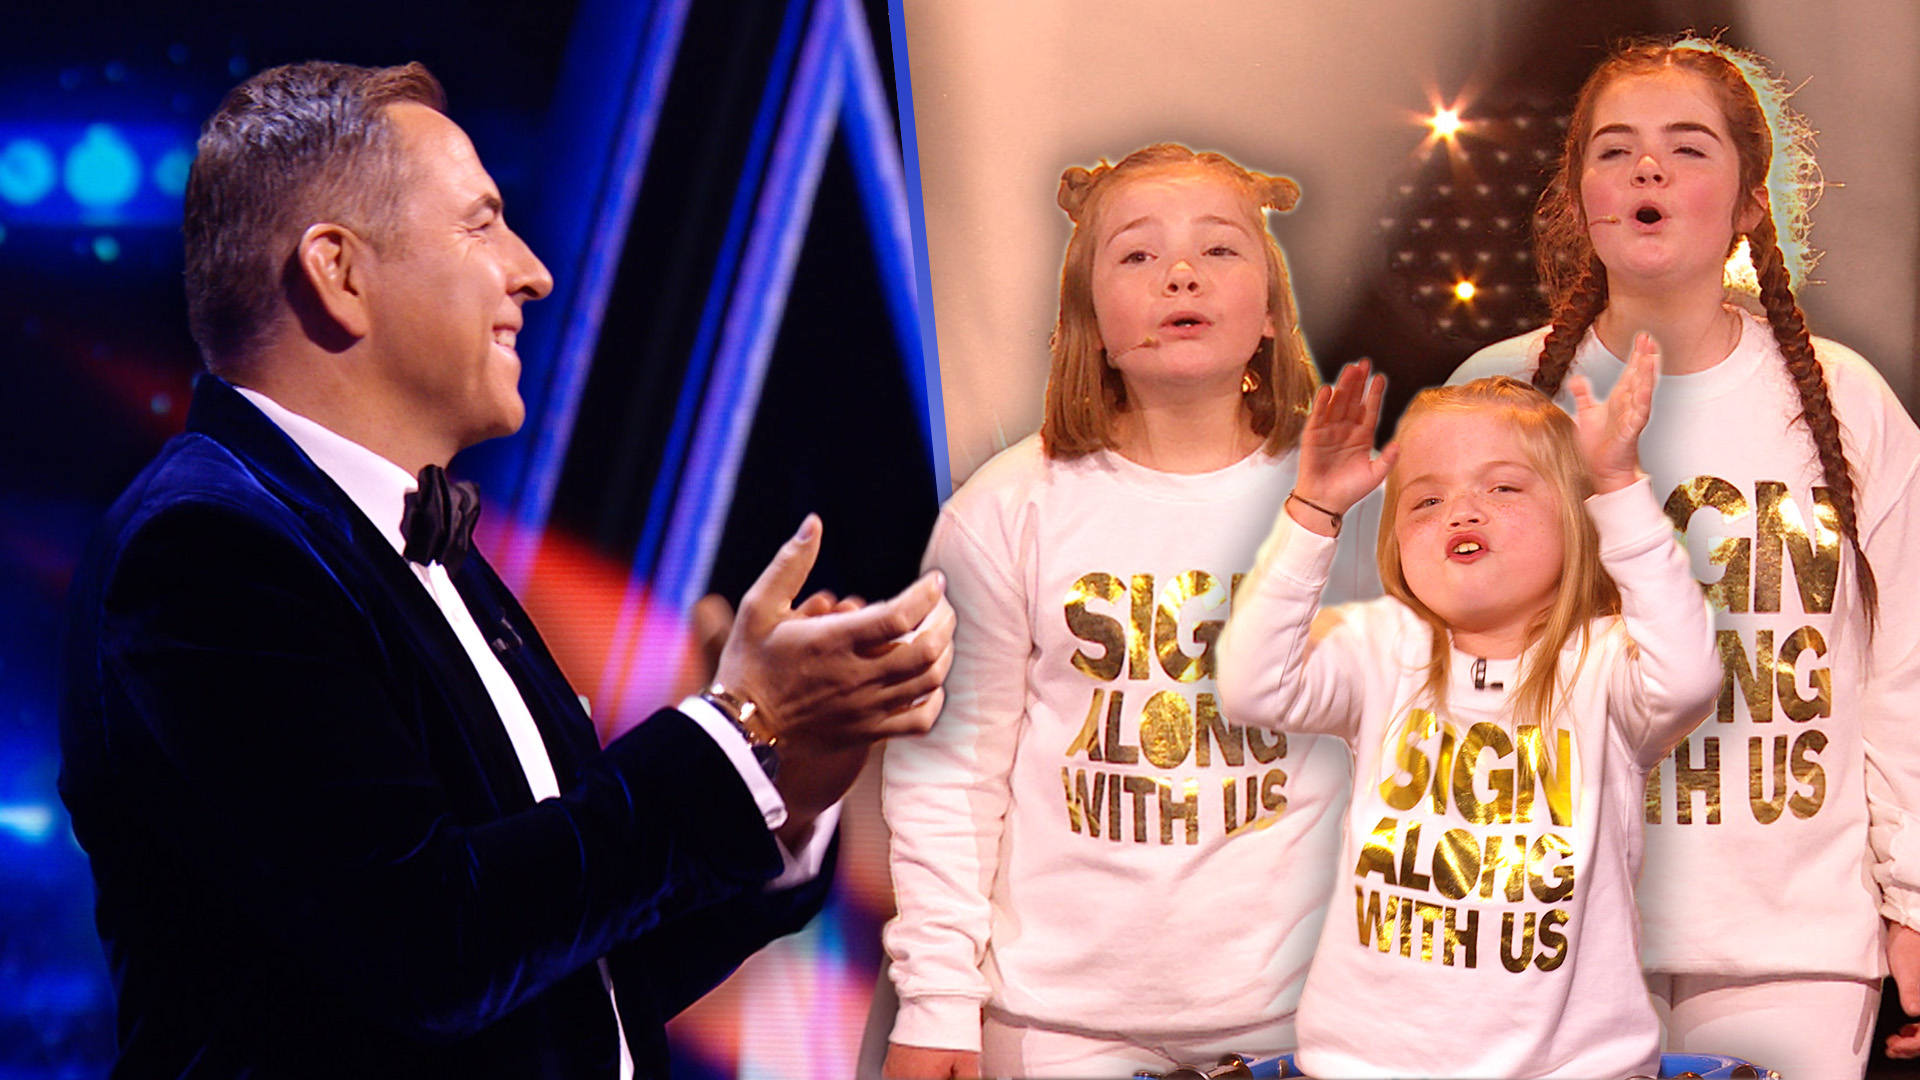 Sign Along With Us bring the FEEL GOOD factor! Britain's Got Talent